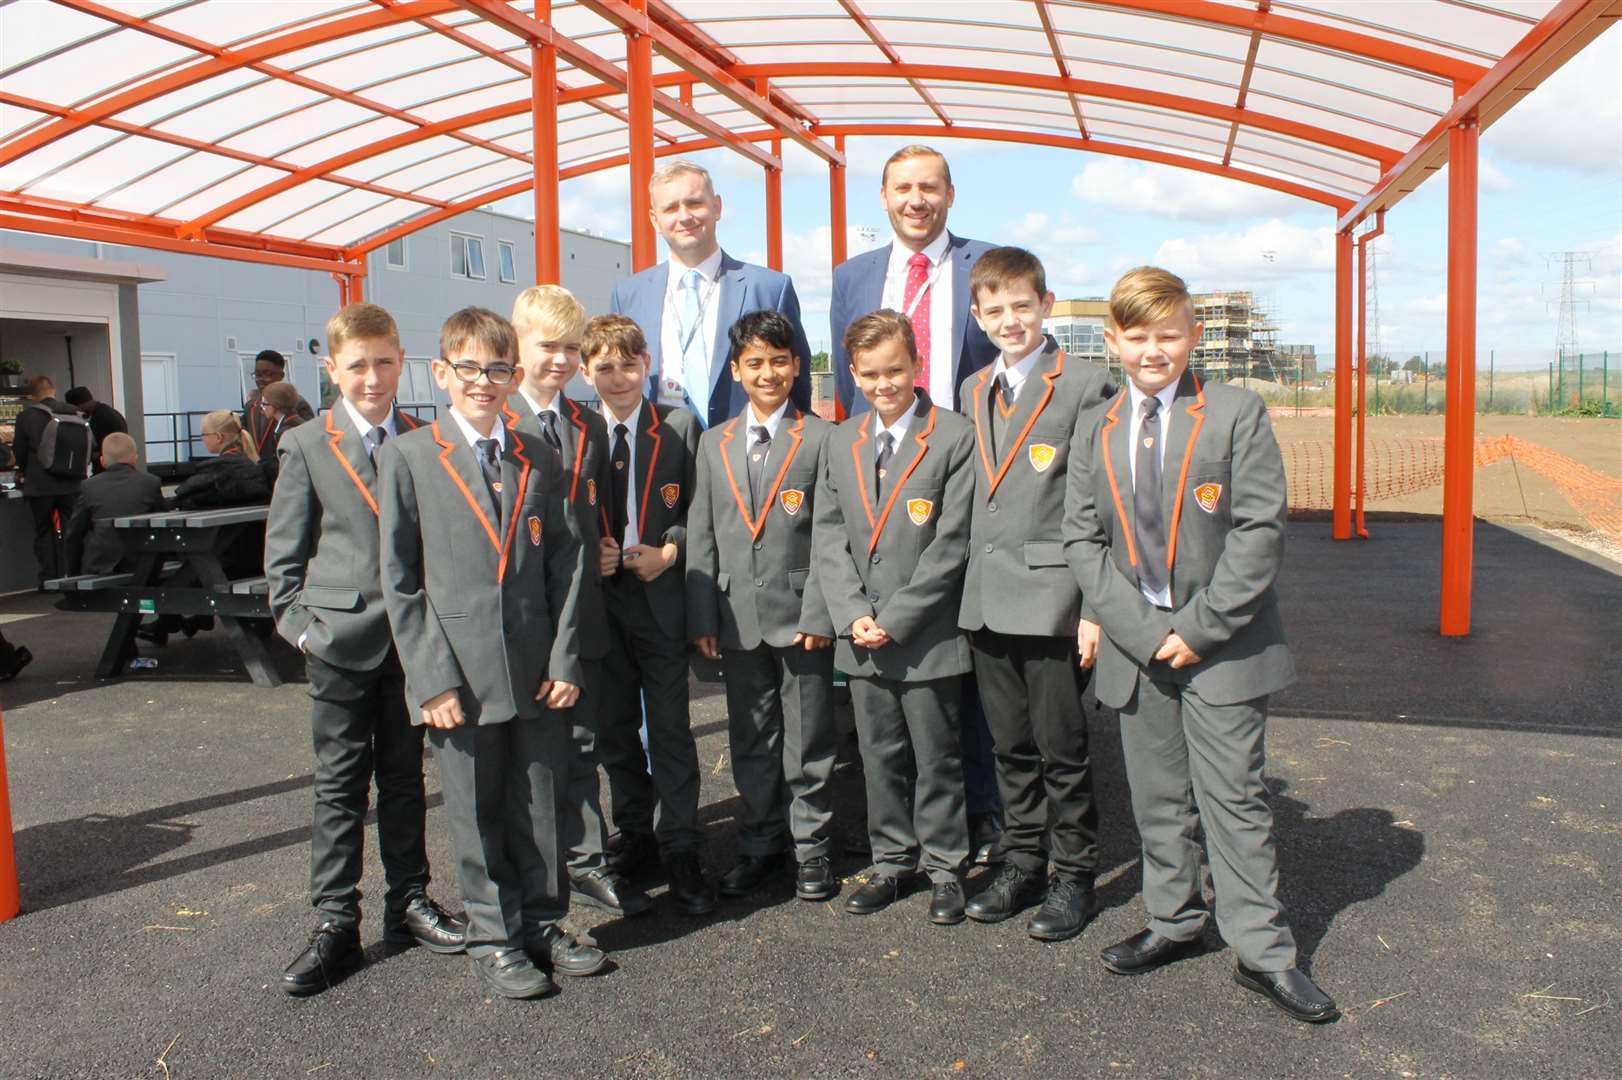 Stone Lodge School, run by Endeavour MAT, has already opened in Dartford